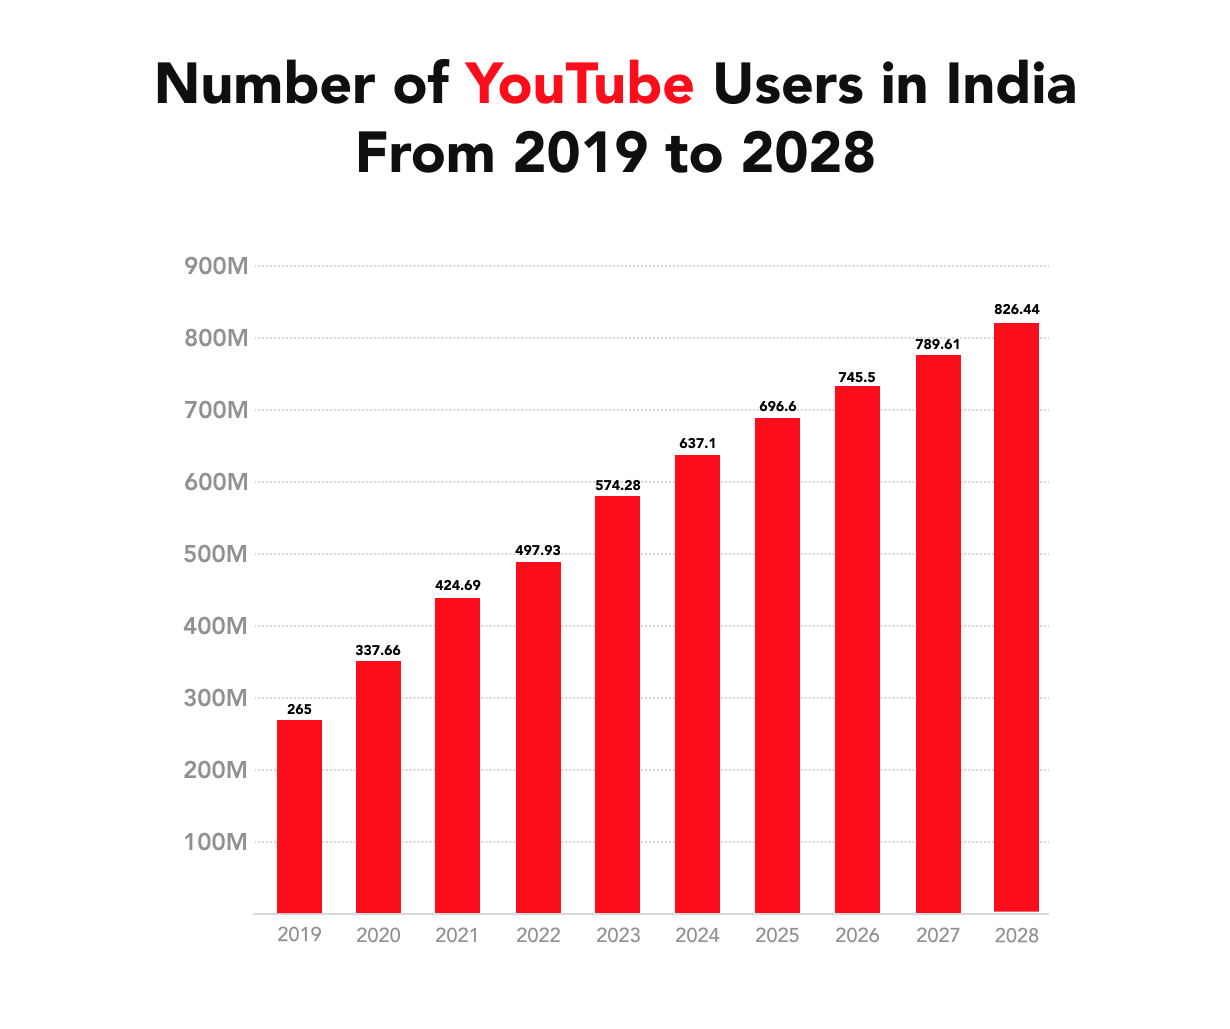 Number of YouTube user in India from 2019 to 2028